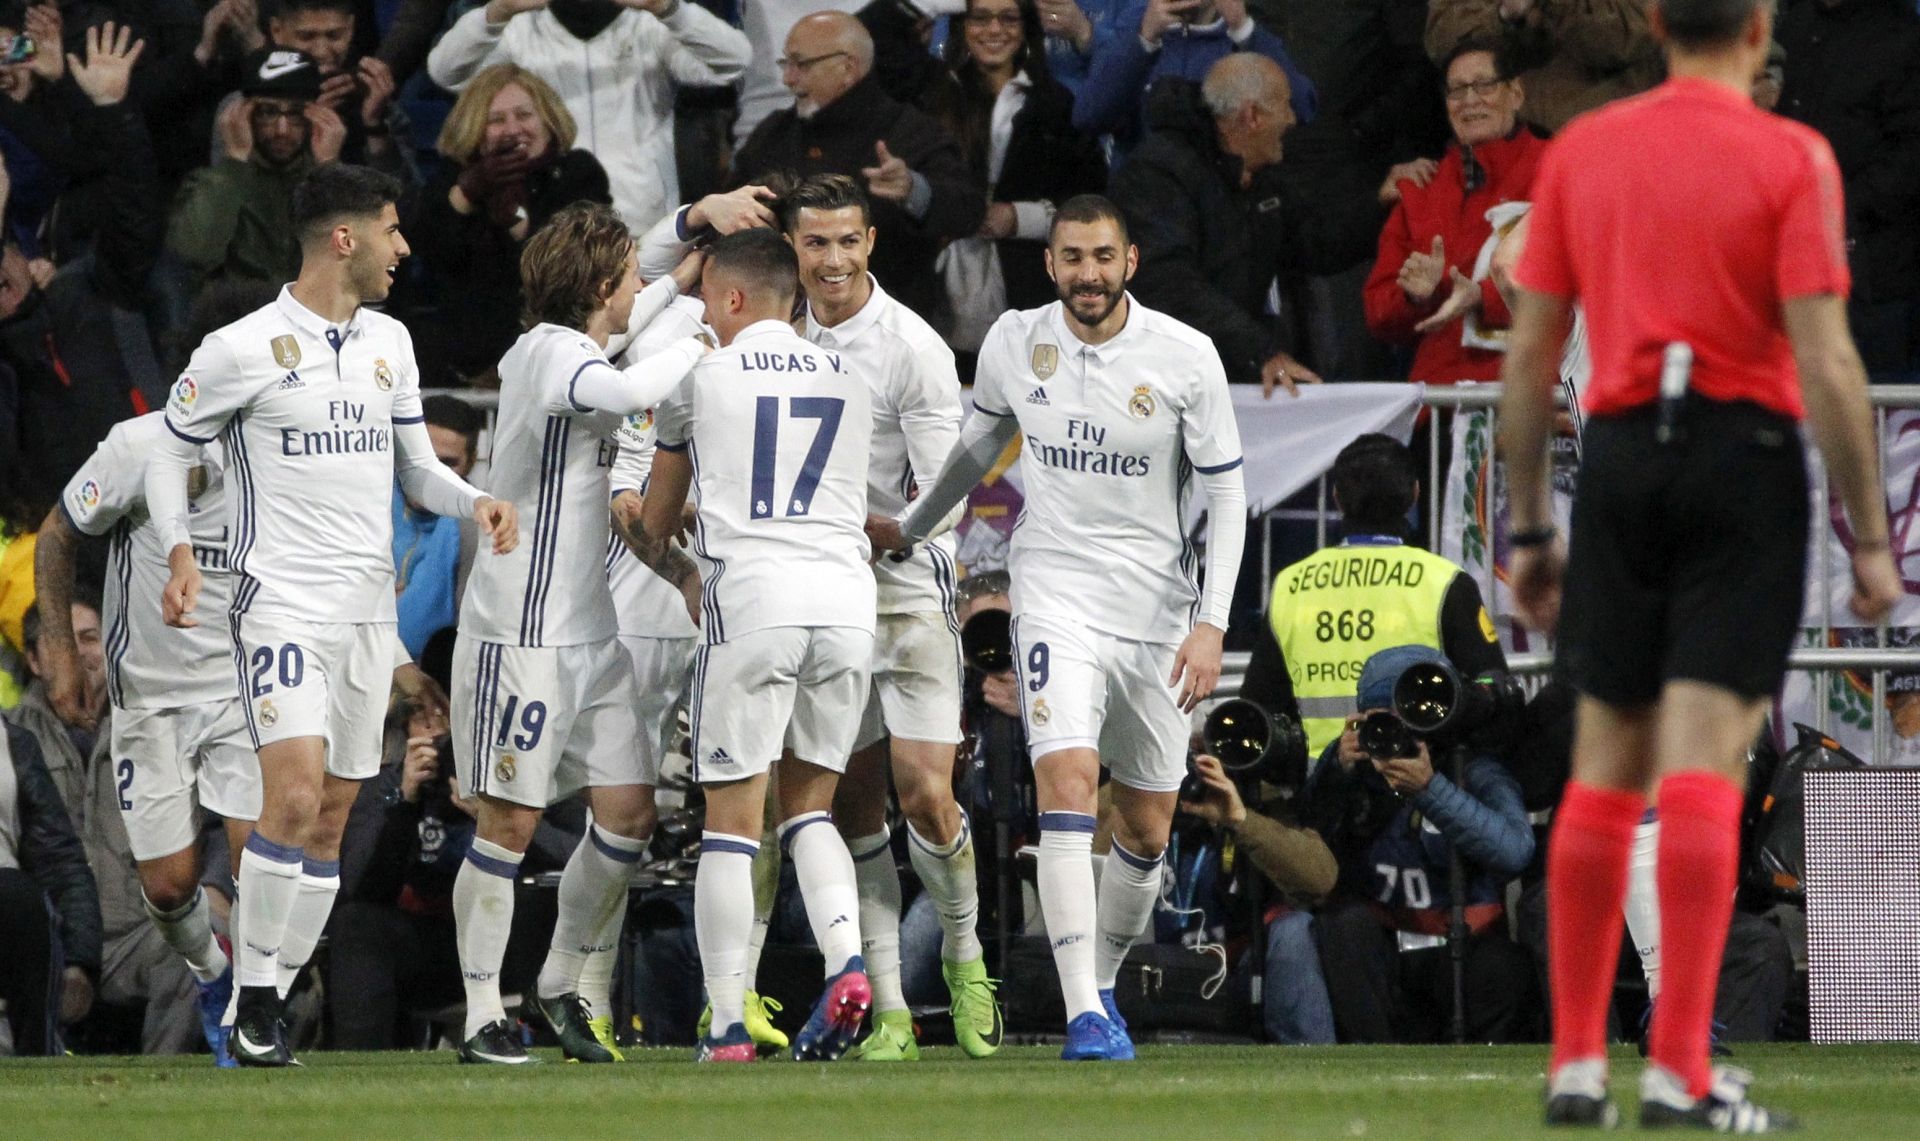 epa05845043 Real Madrid players celebrate the 2-1 goal  during the Spanish Primera Division soccer match between Real Madrid and Real Betis at Santiago Bernabeu stadium in Madrid, Spain, 12 March 2017.  EPA/VICTOR LERENA